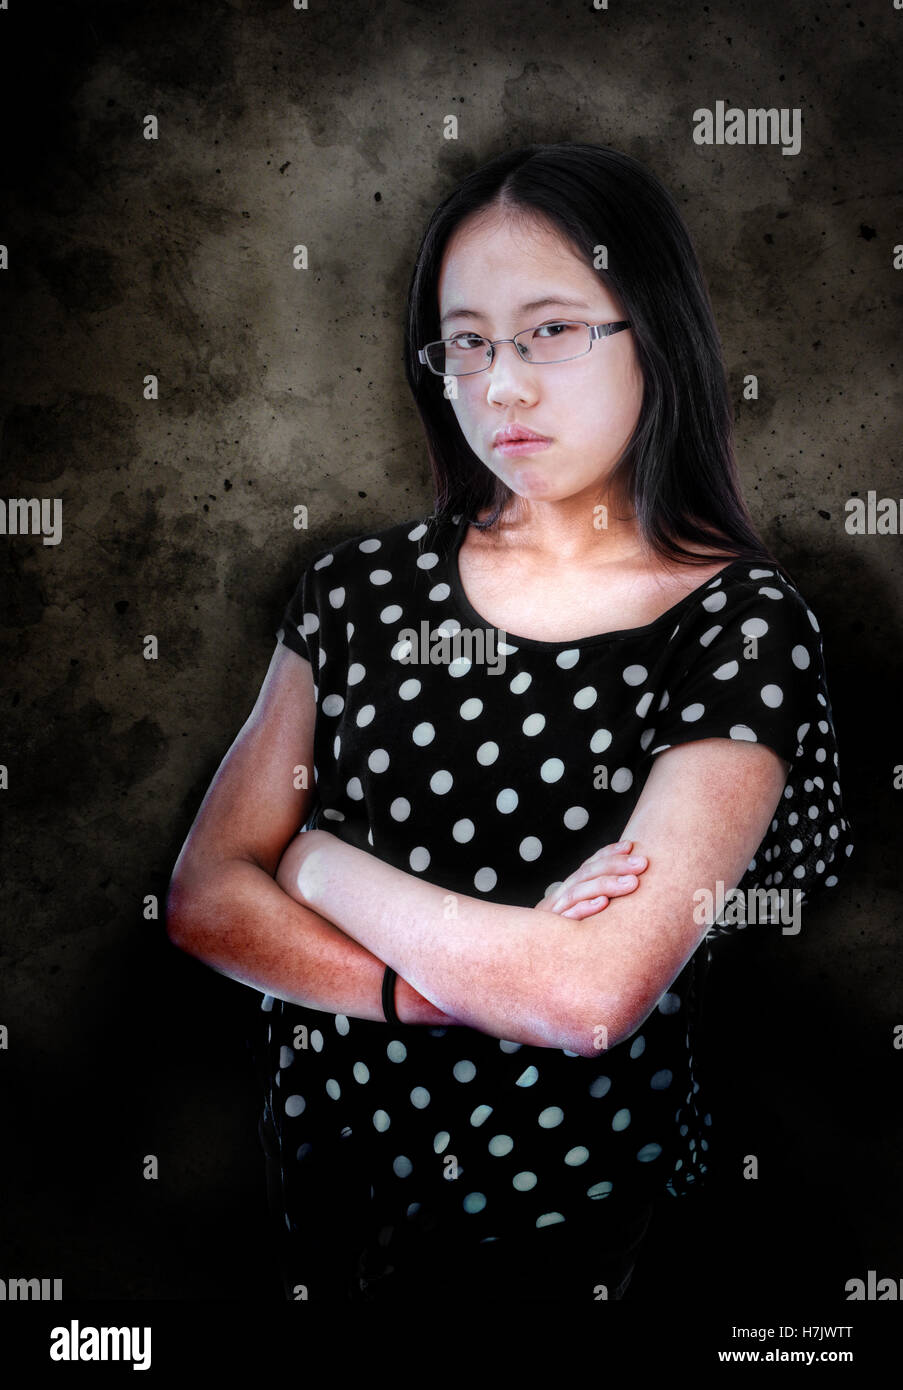 Asian tween girl with folded arms showing displeasure Stock Photo